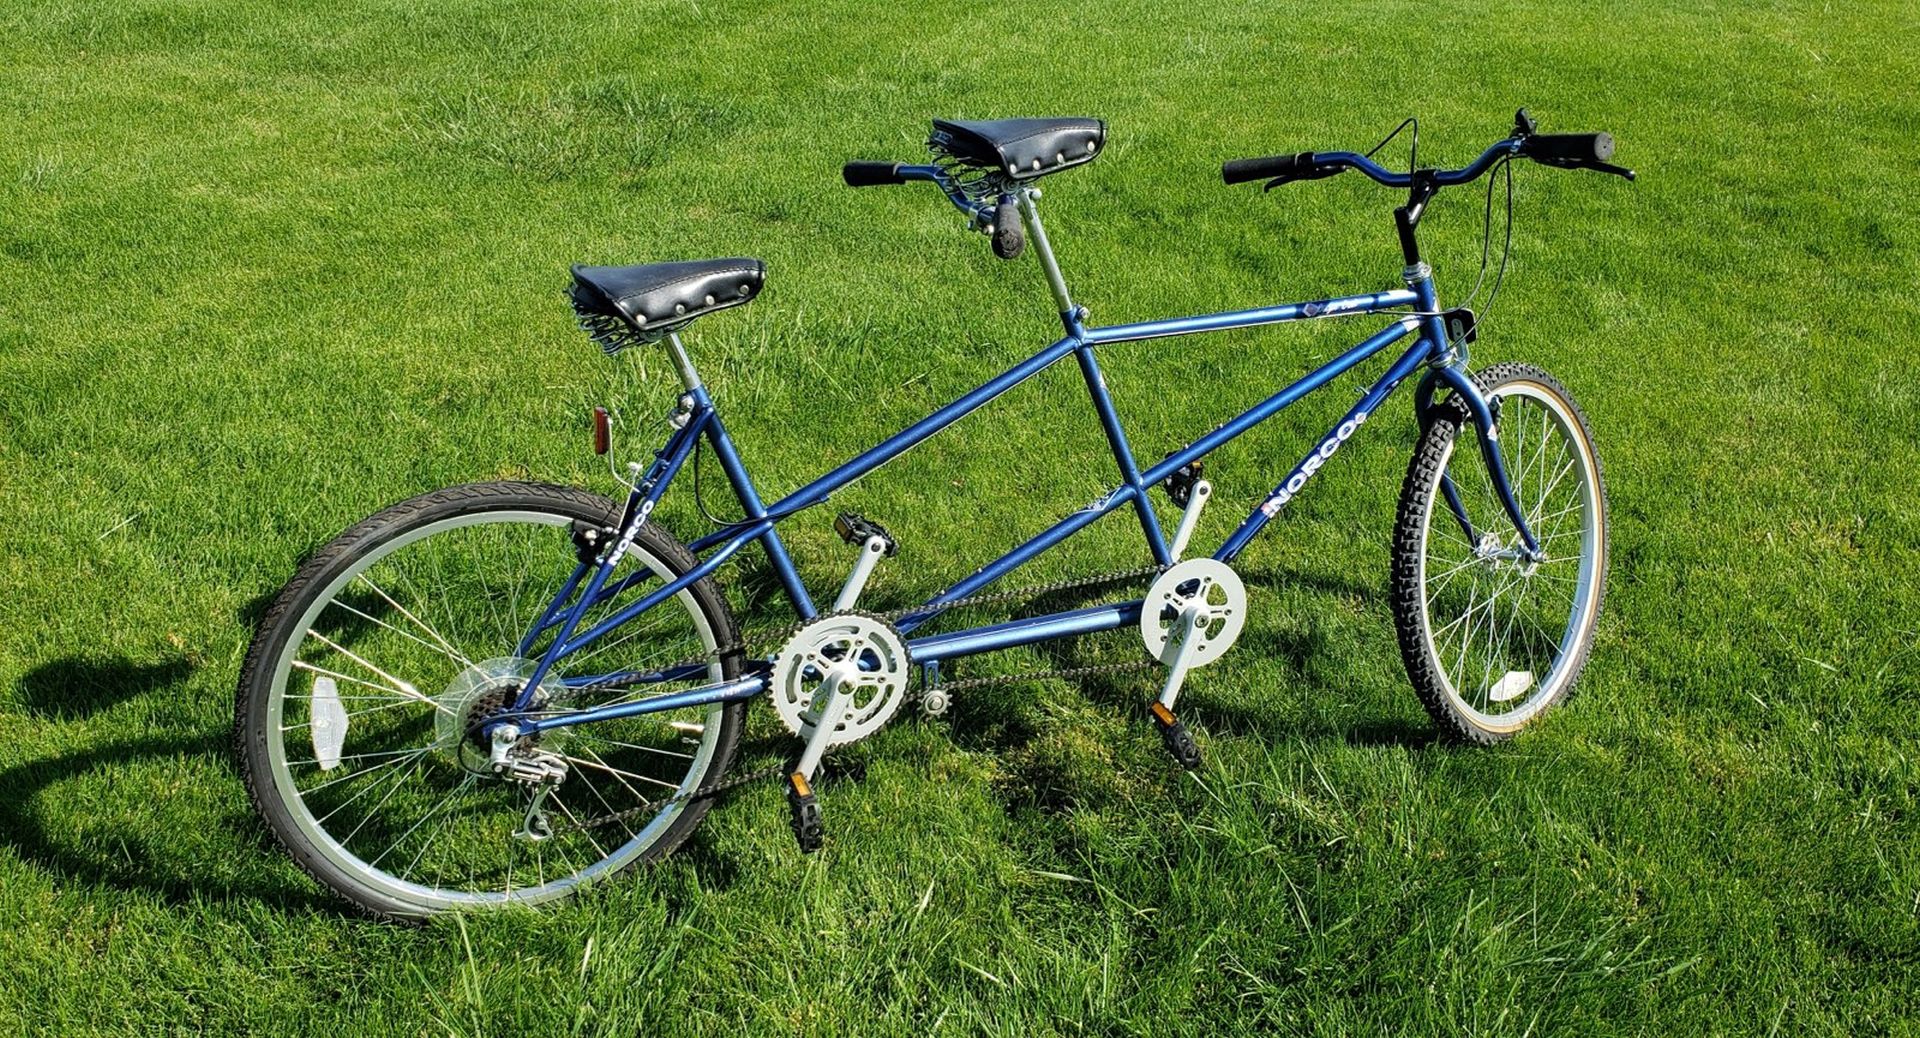 Bicycle Built for 2-image